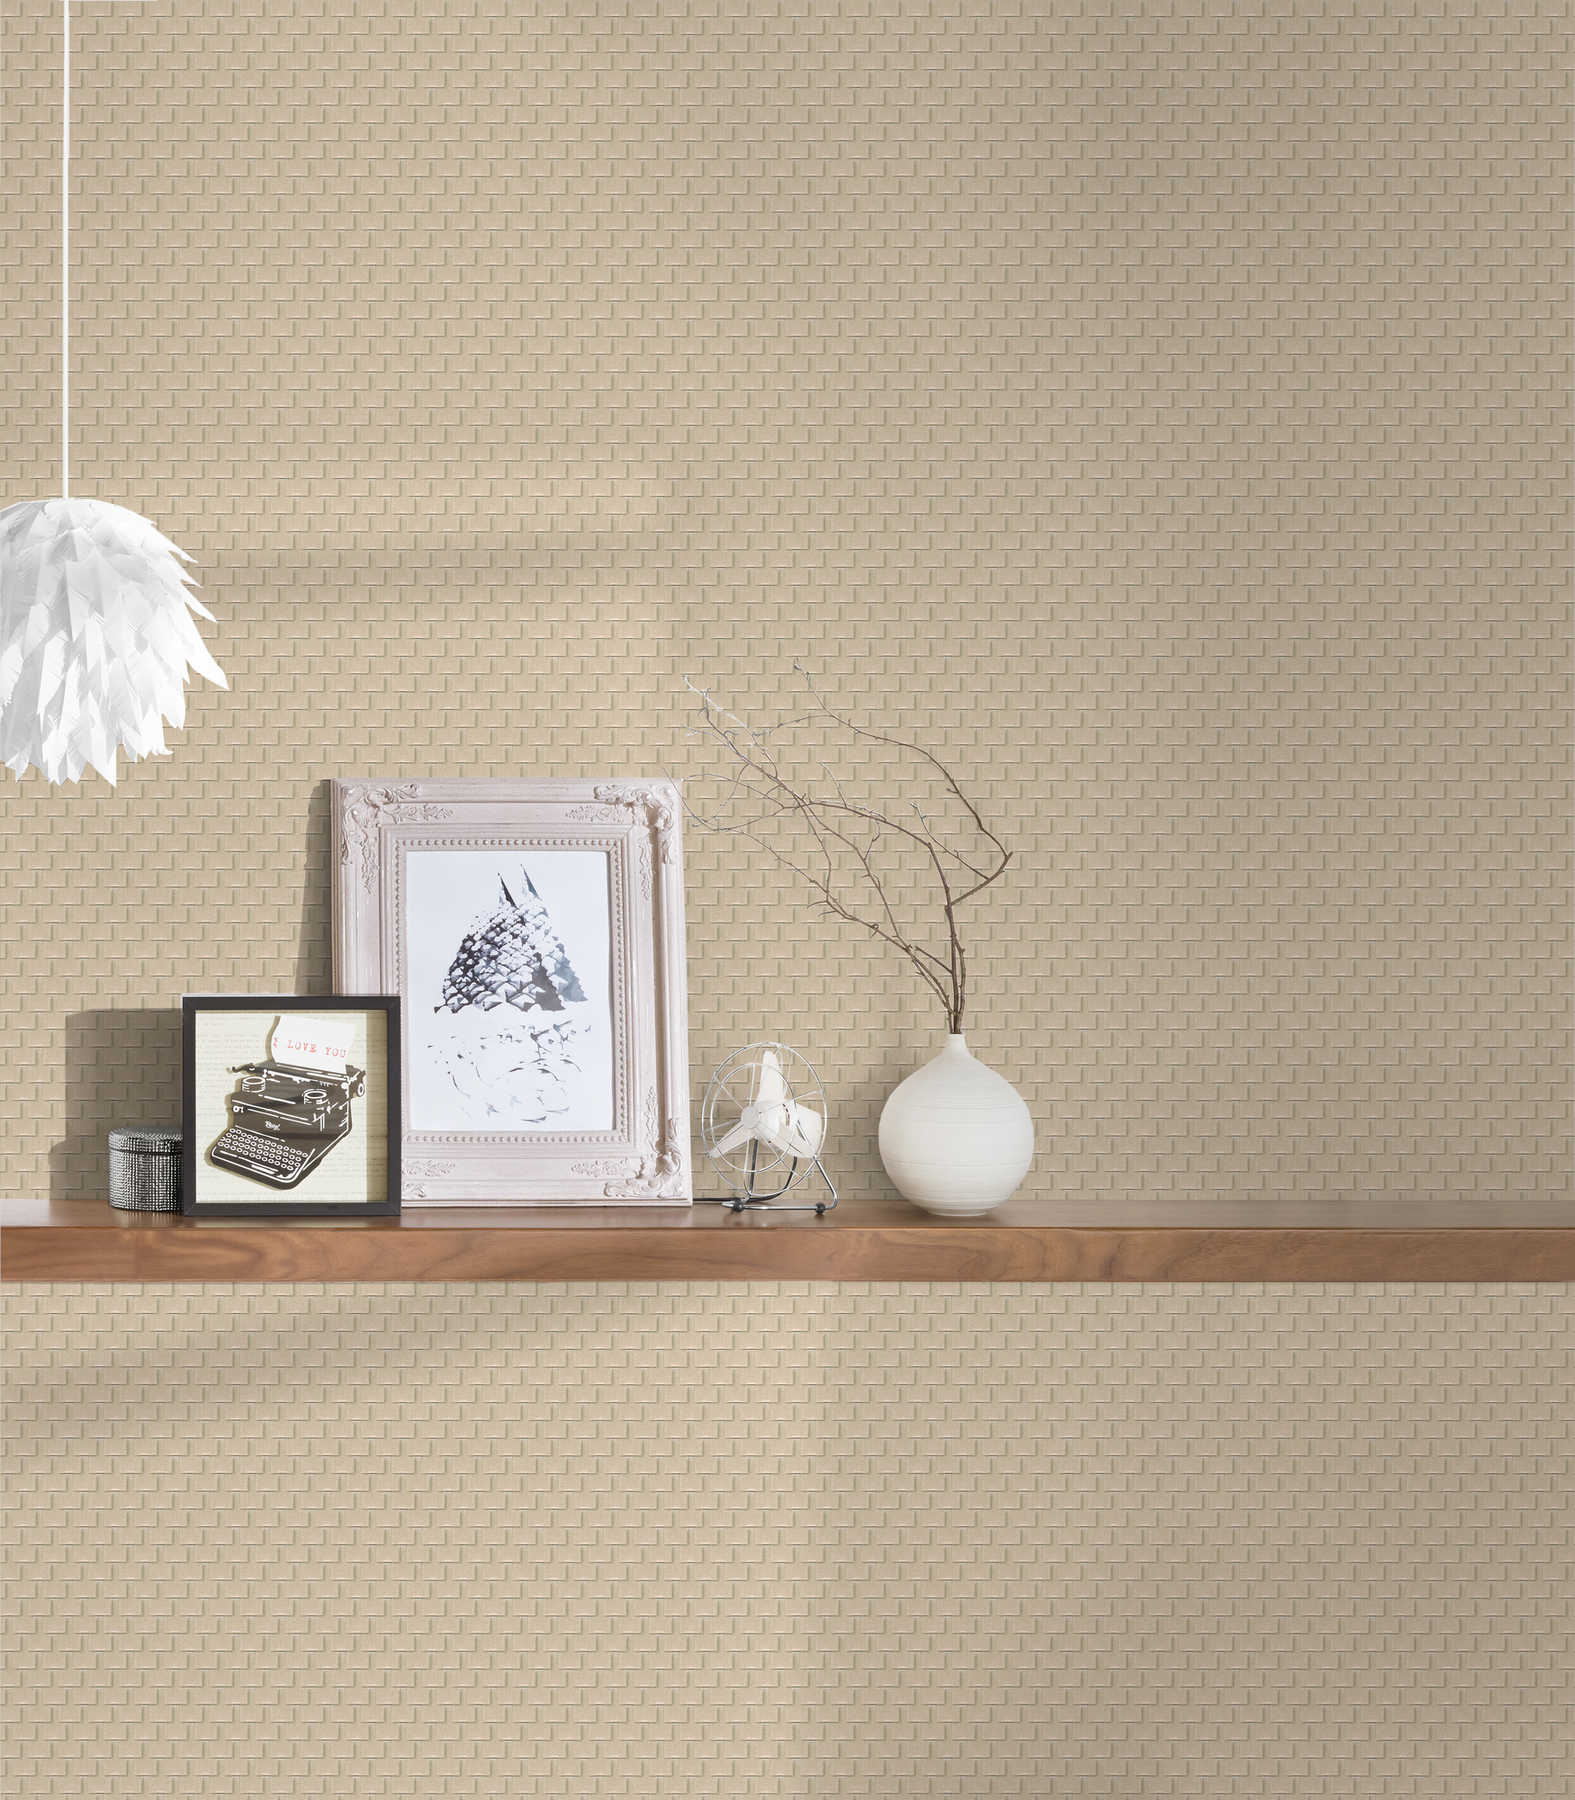             Patterned wallpaper with facet design and 3D effect - beige, bronze
        